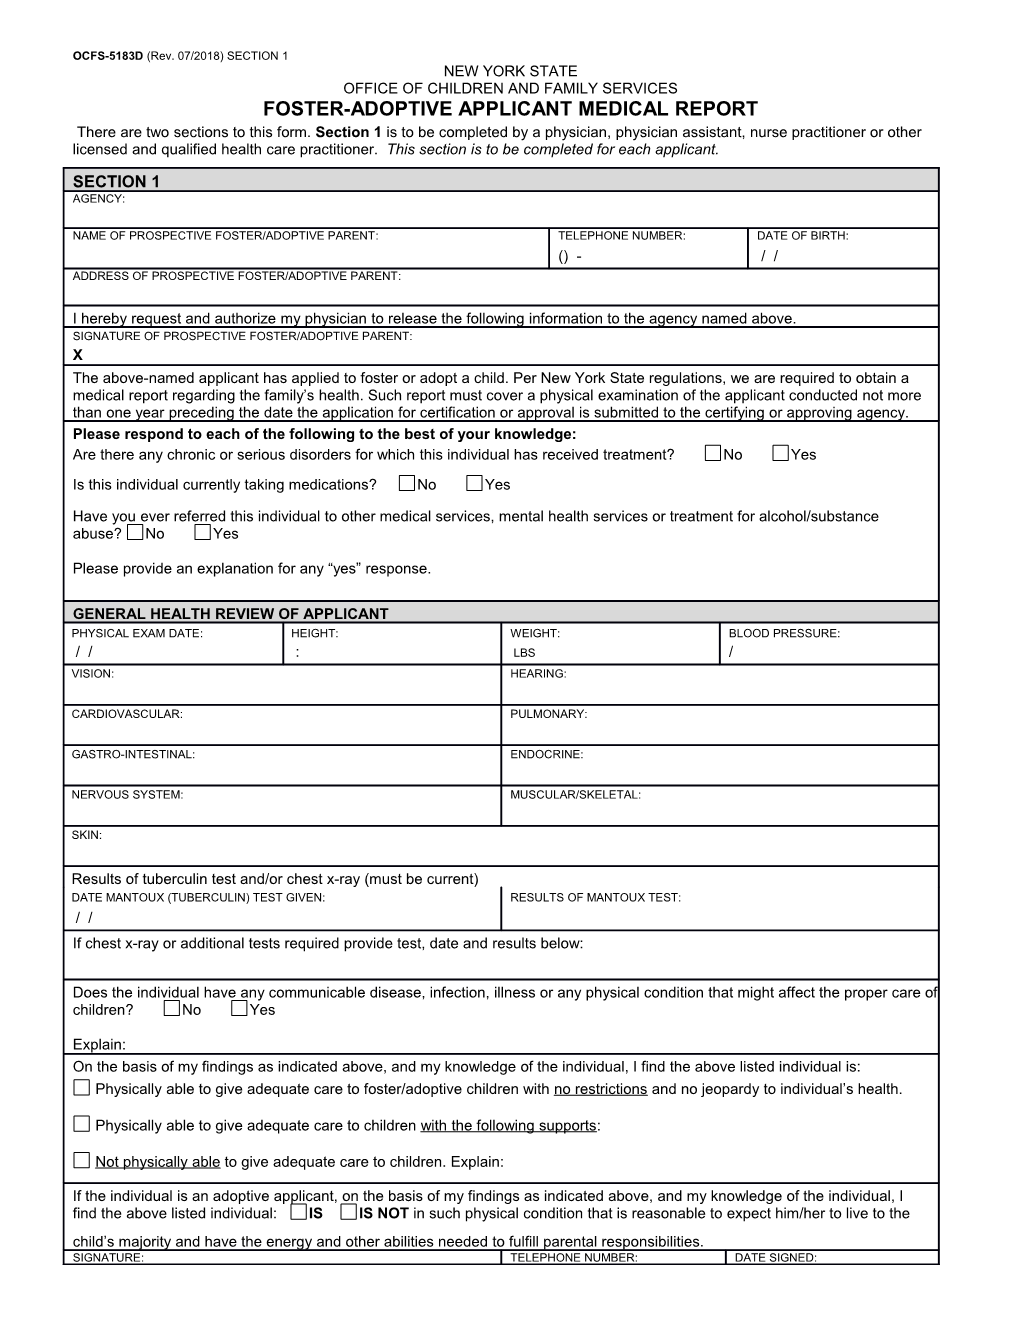 Foster-Adoptive Applicant Medical Report